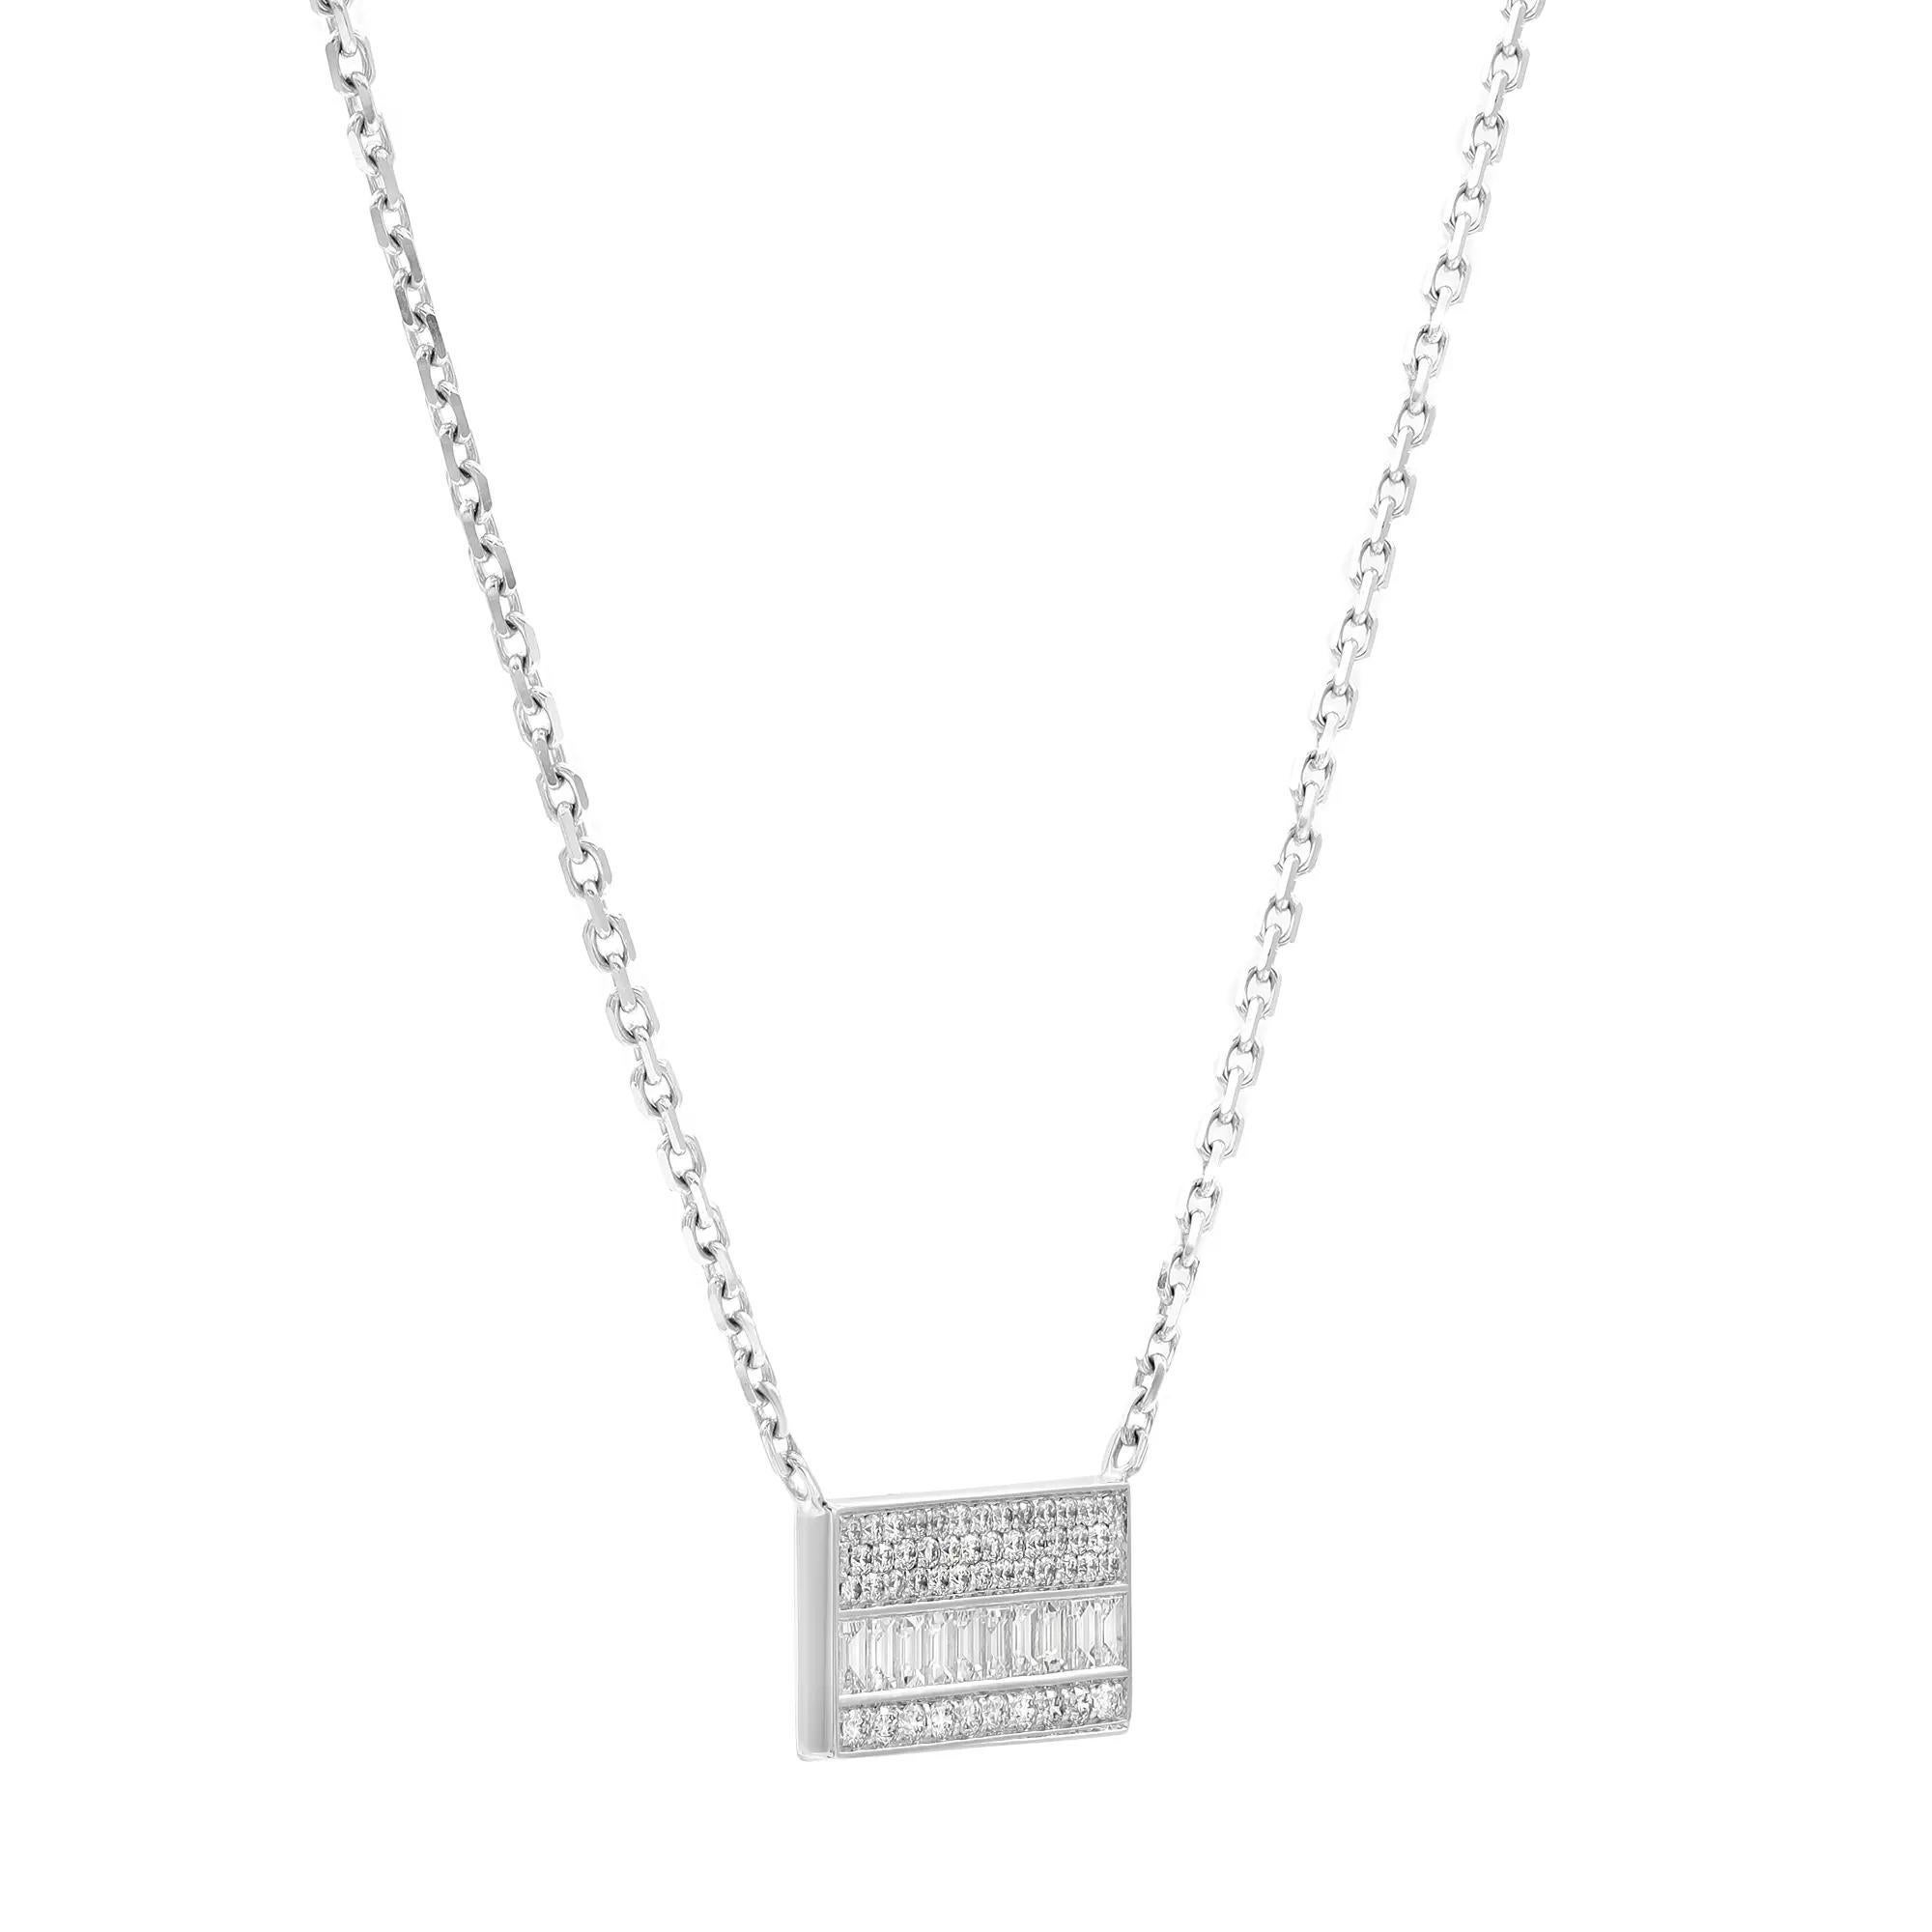 Round Cut Messika 0.72Cttw Liz Diamond Pendant Chain Necklace 18K White Gold 17 Inches For Sale